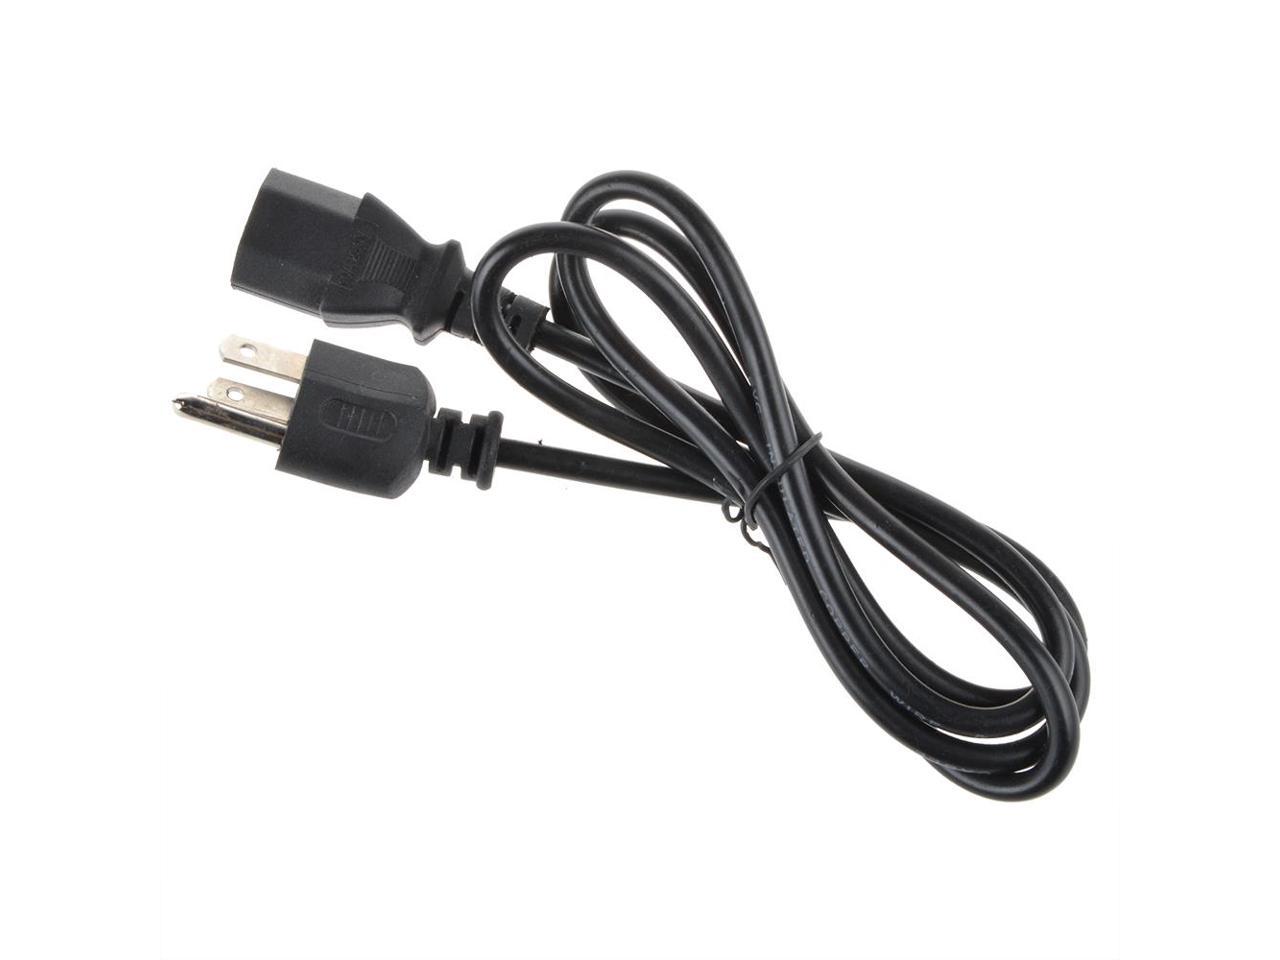 NEW HP Pavilion F1903 LCD AC Power Cord Cable Black Plug 